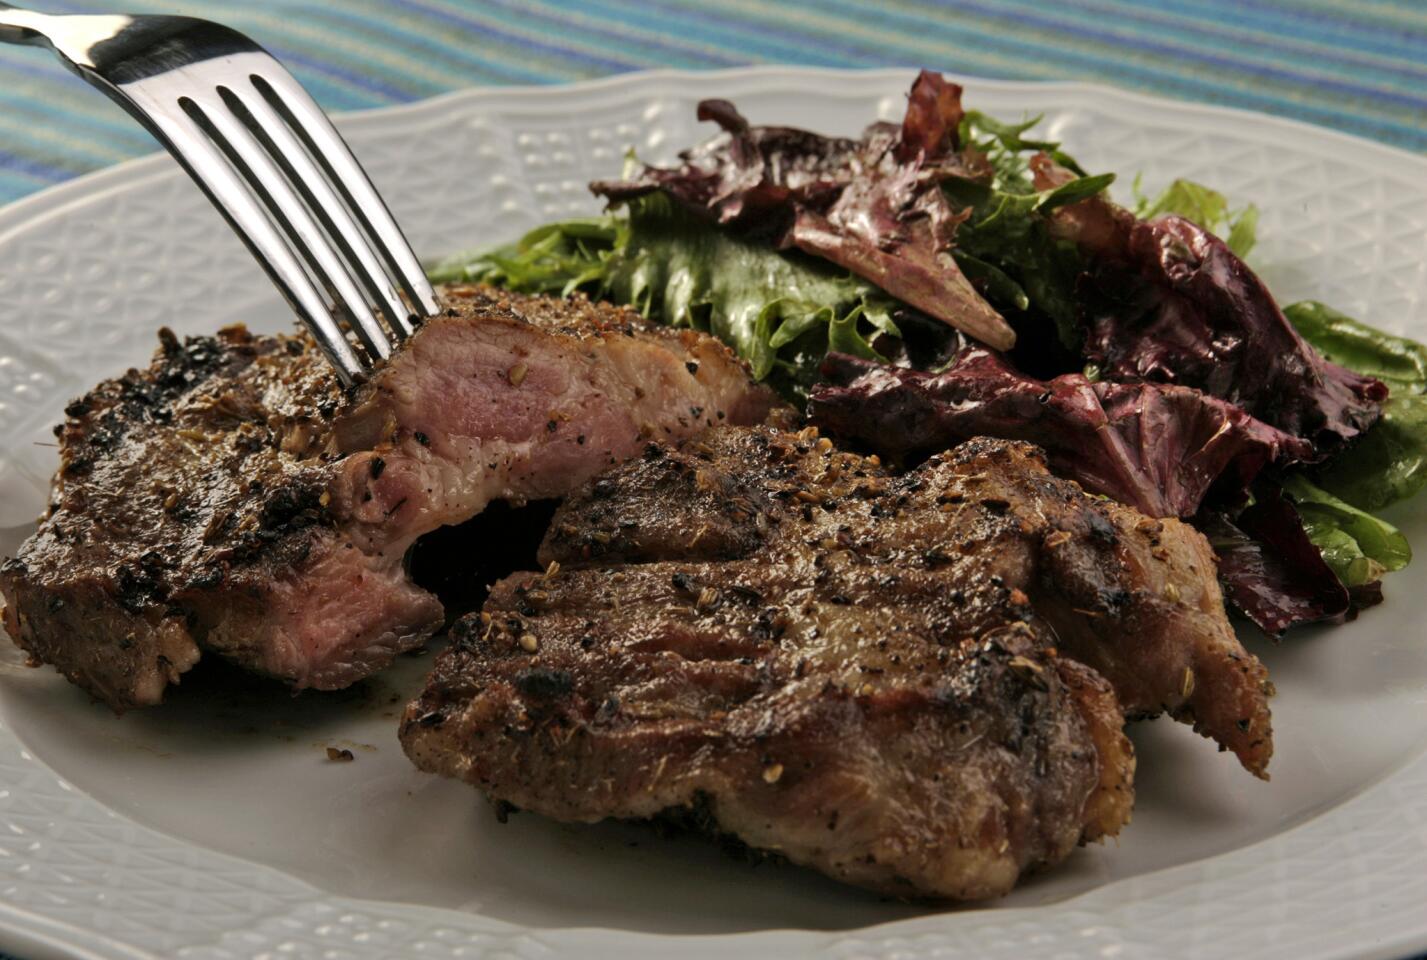 Grilled pork steaks with fennel. Click here for the recipe.